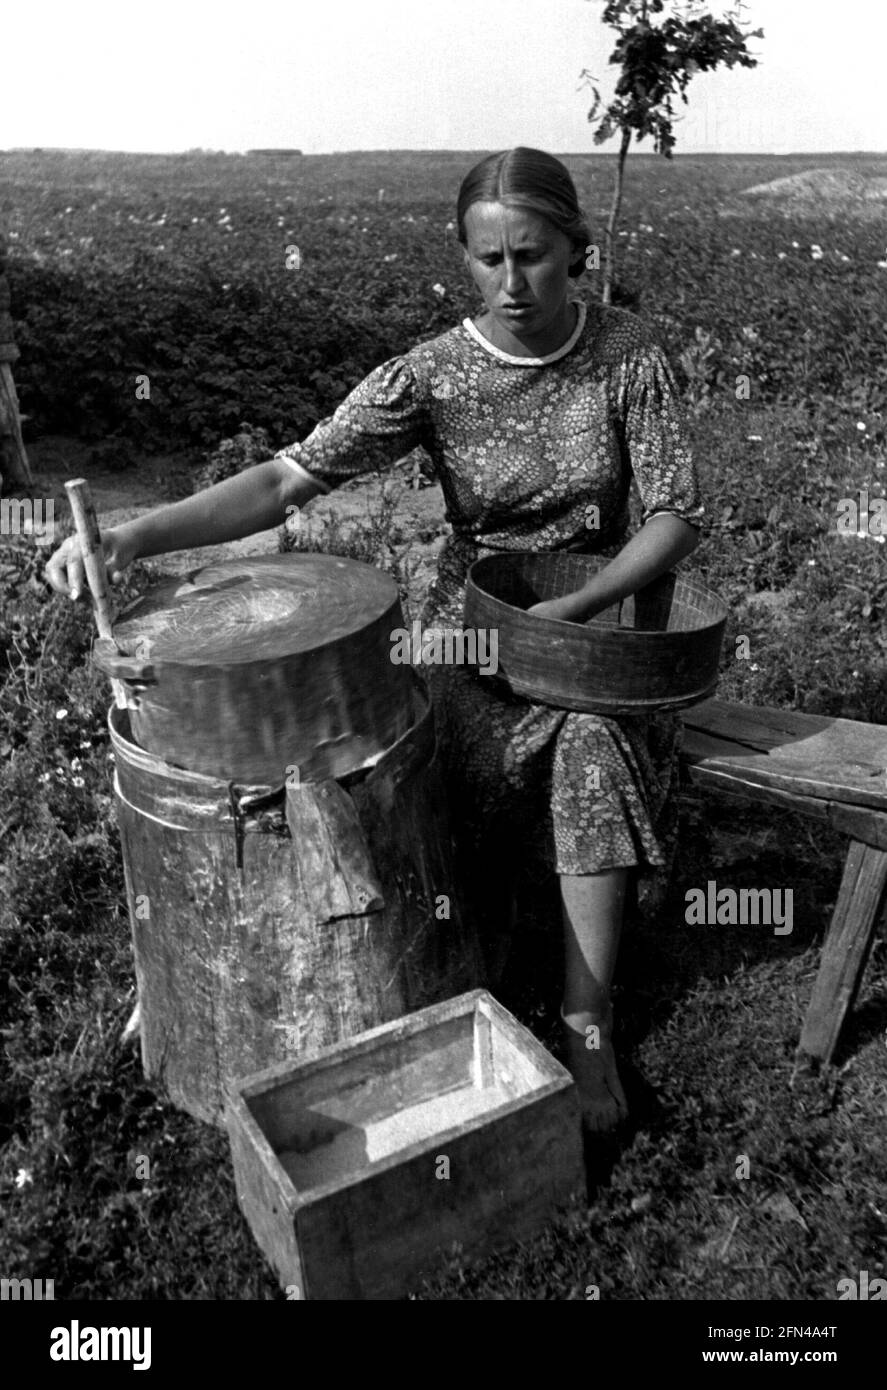 agriculture, Soviet Union, countrywoman with grain mill, ADDITIONAL-RIGHTS-CLEARANCE-INFO-NOT-AVAILABLE Stock Photo